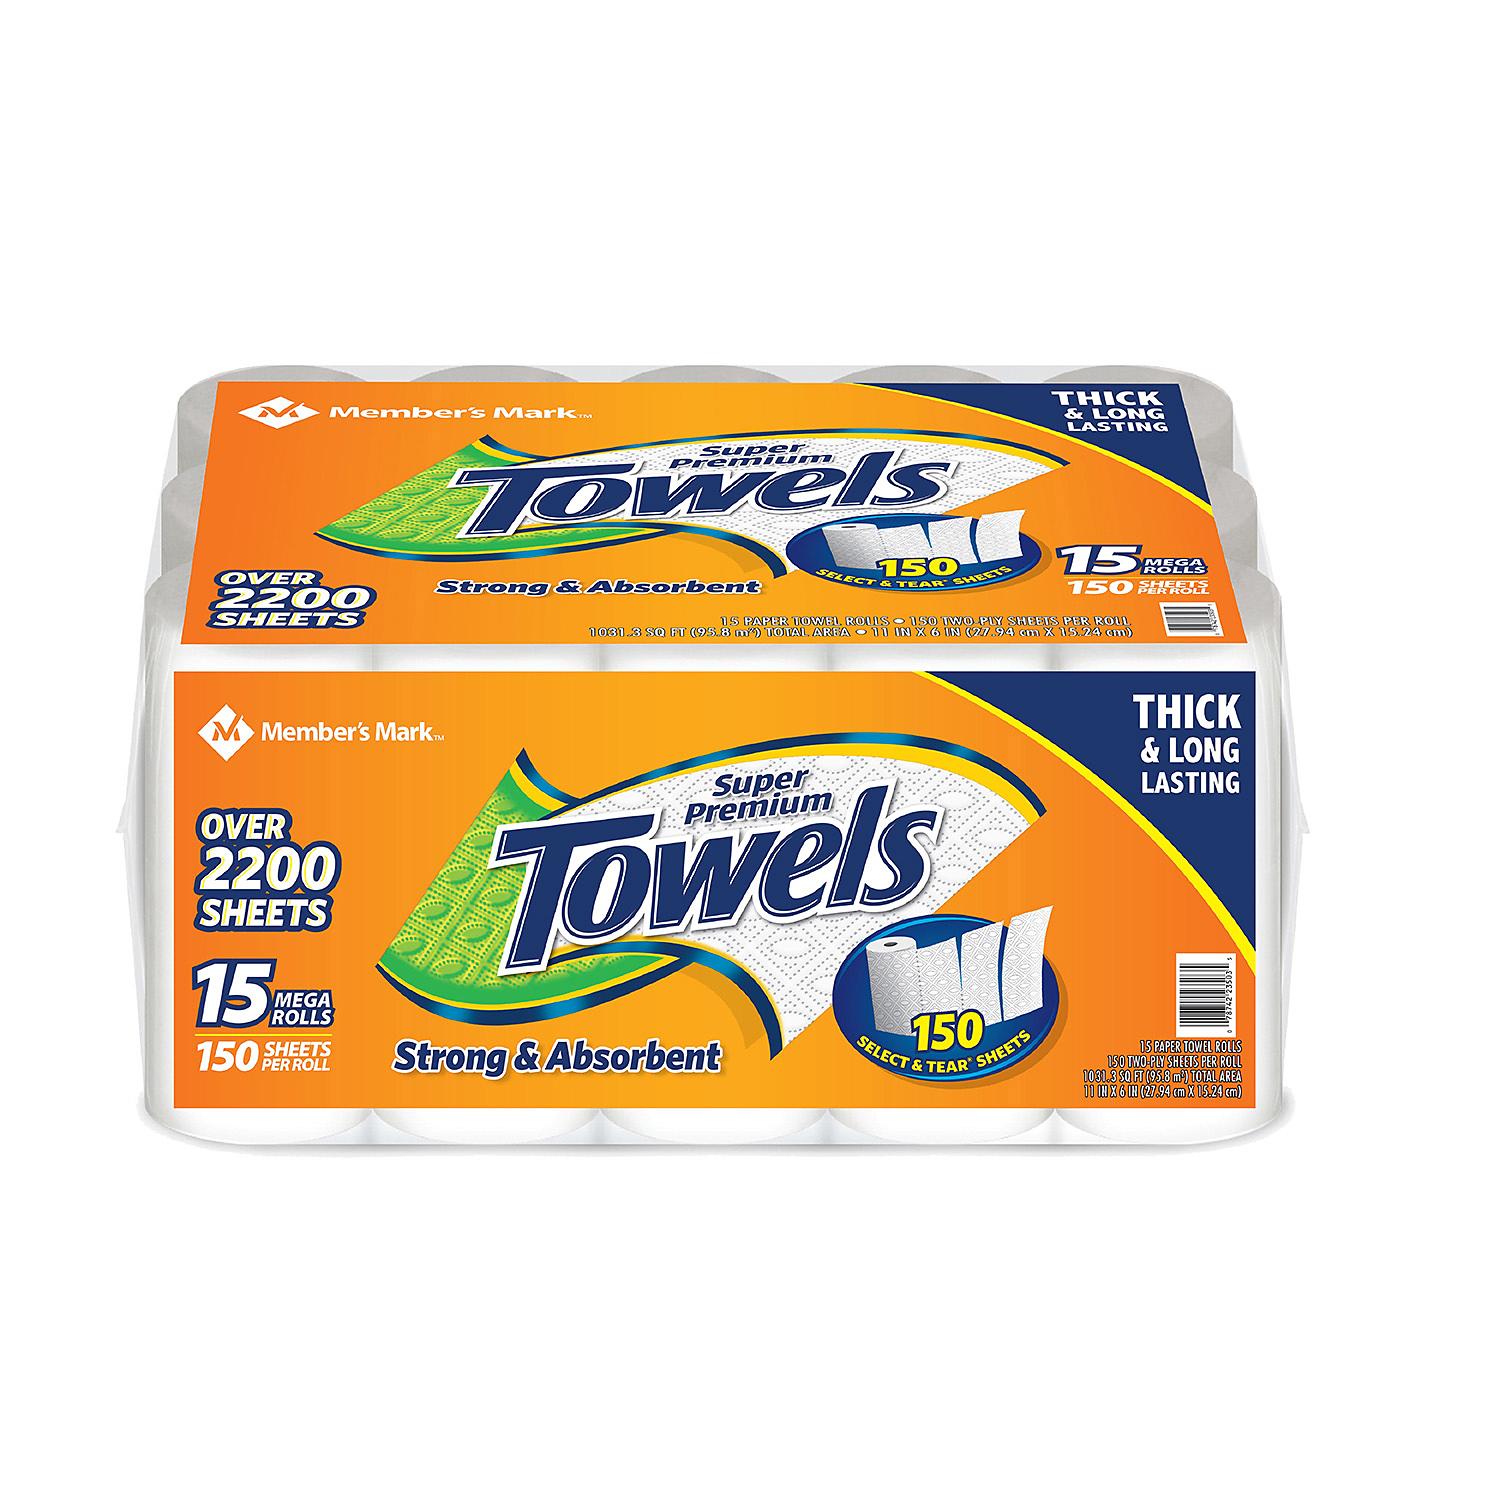 Member's Mark Super Premium Individually Wrapped Paper Towels, 150 Sheets, 15 Ct, 1 Case